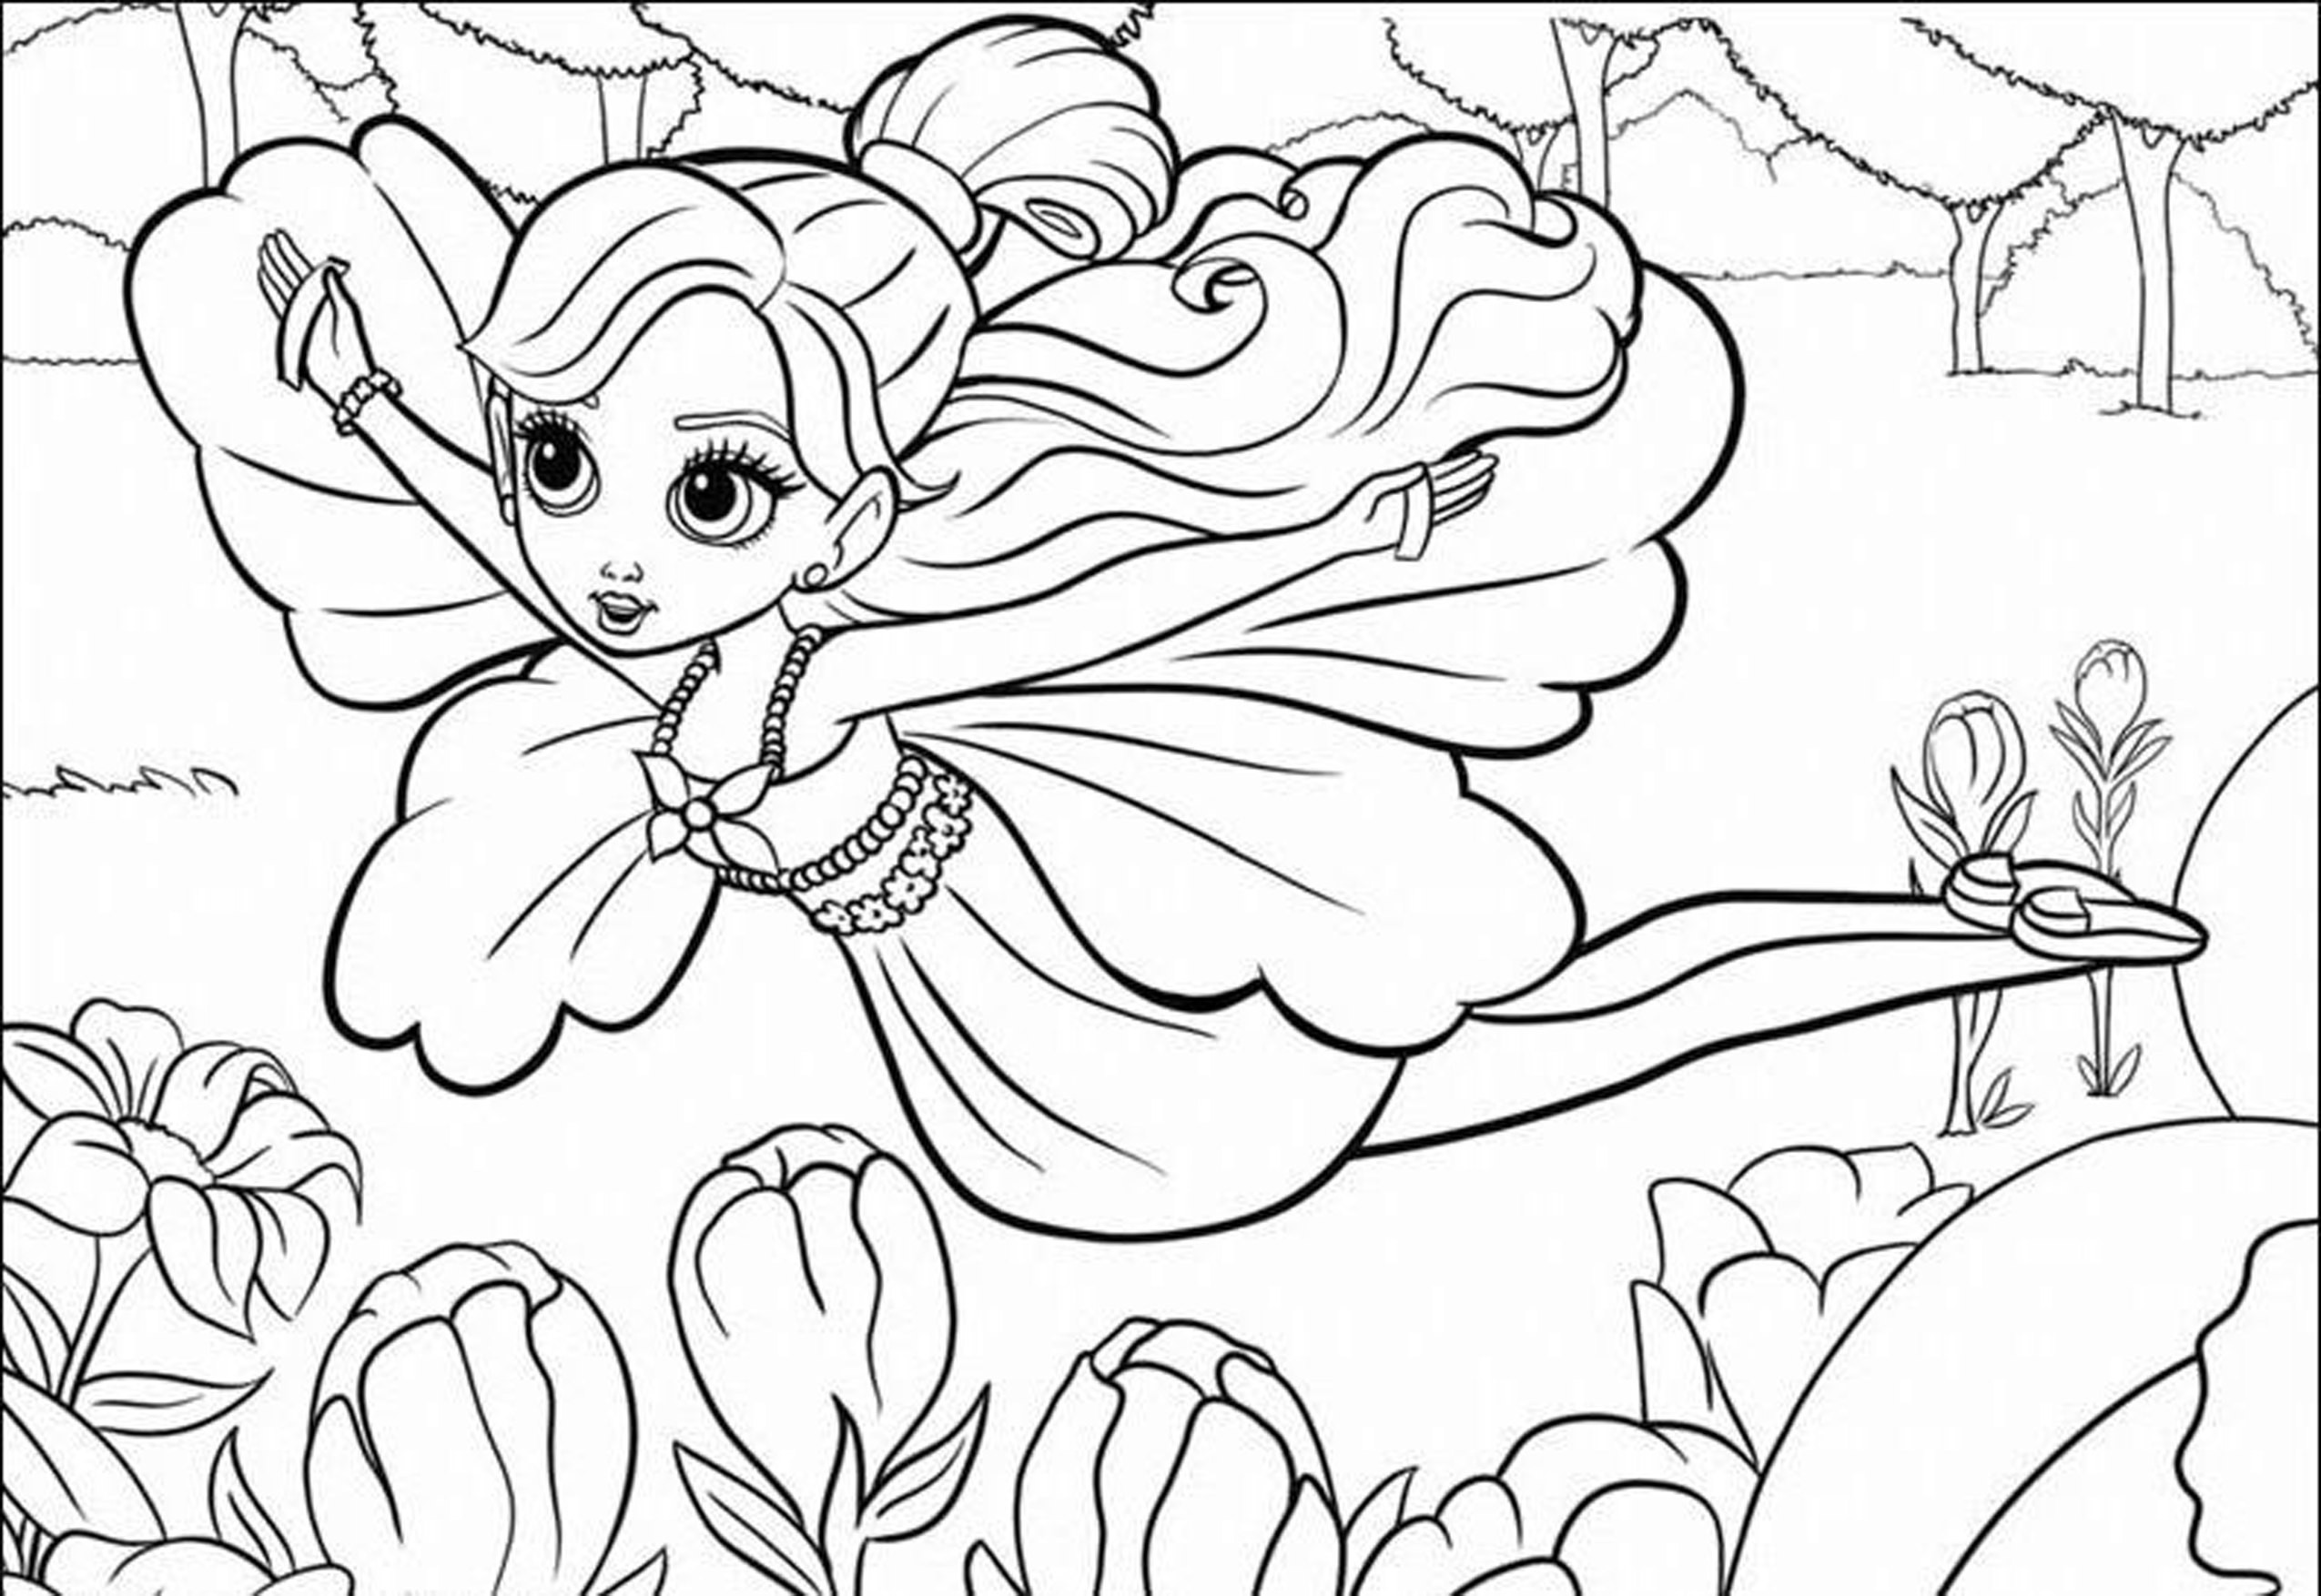 Coloring Sheets For Girls 8 10
 Cartoon Coloring Pages For Teenagers Girls Kids Colouring